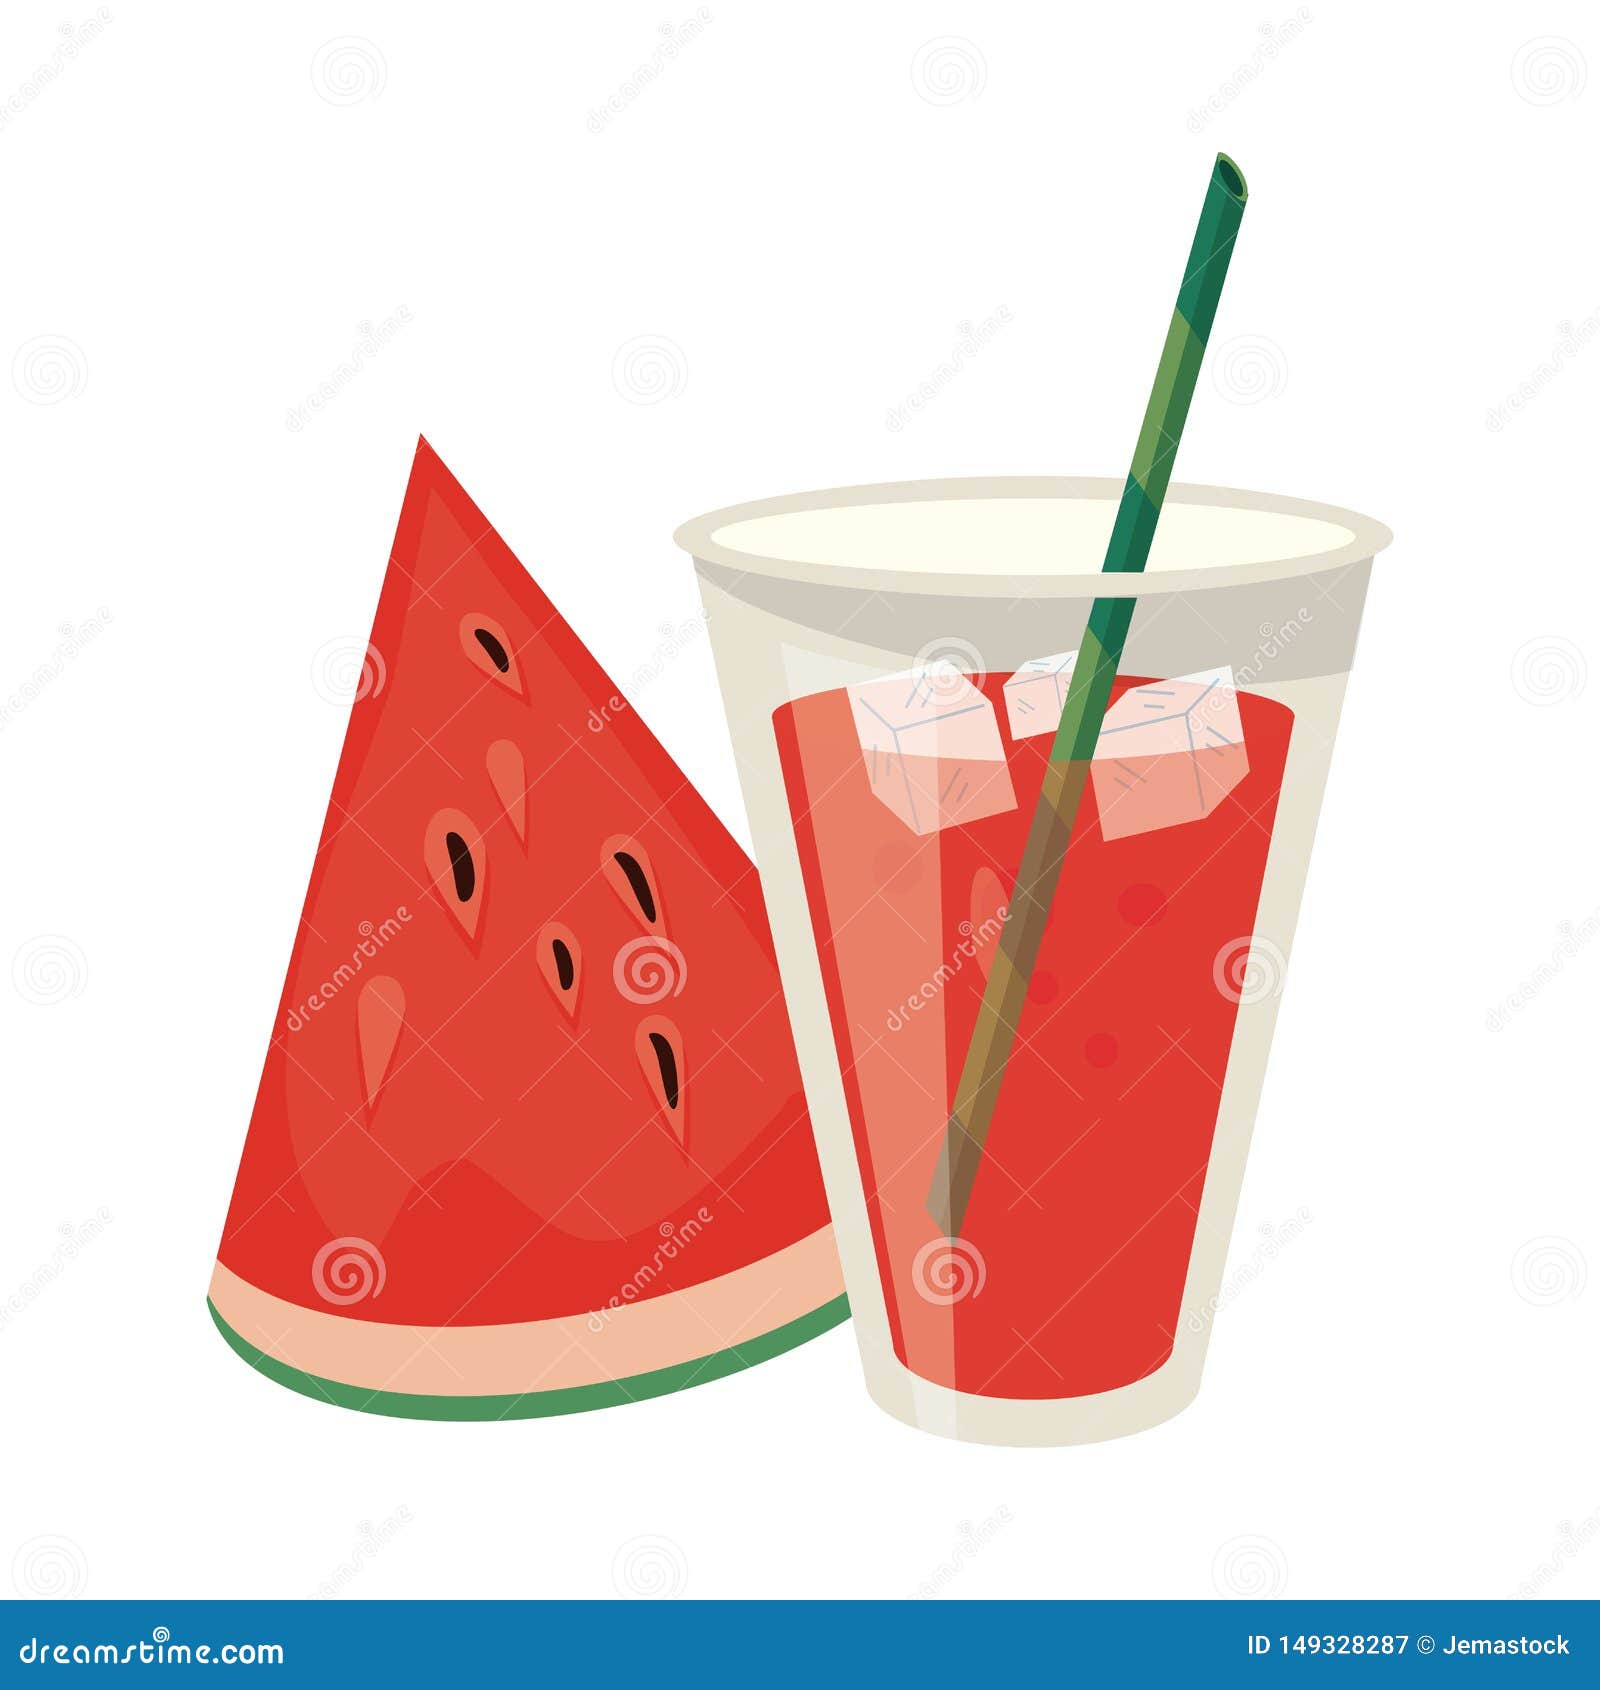 Watermelon and Juice Cup with Straw Cartoon Stock Vector - Illustration of  summer, refreshment: 149328287